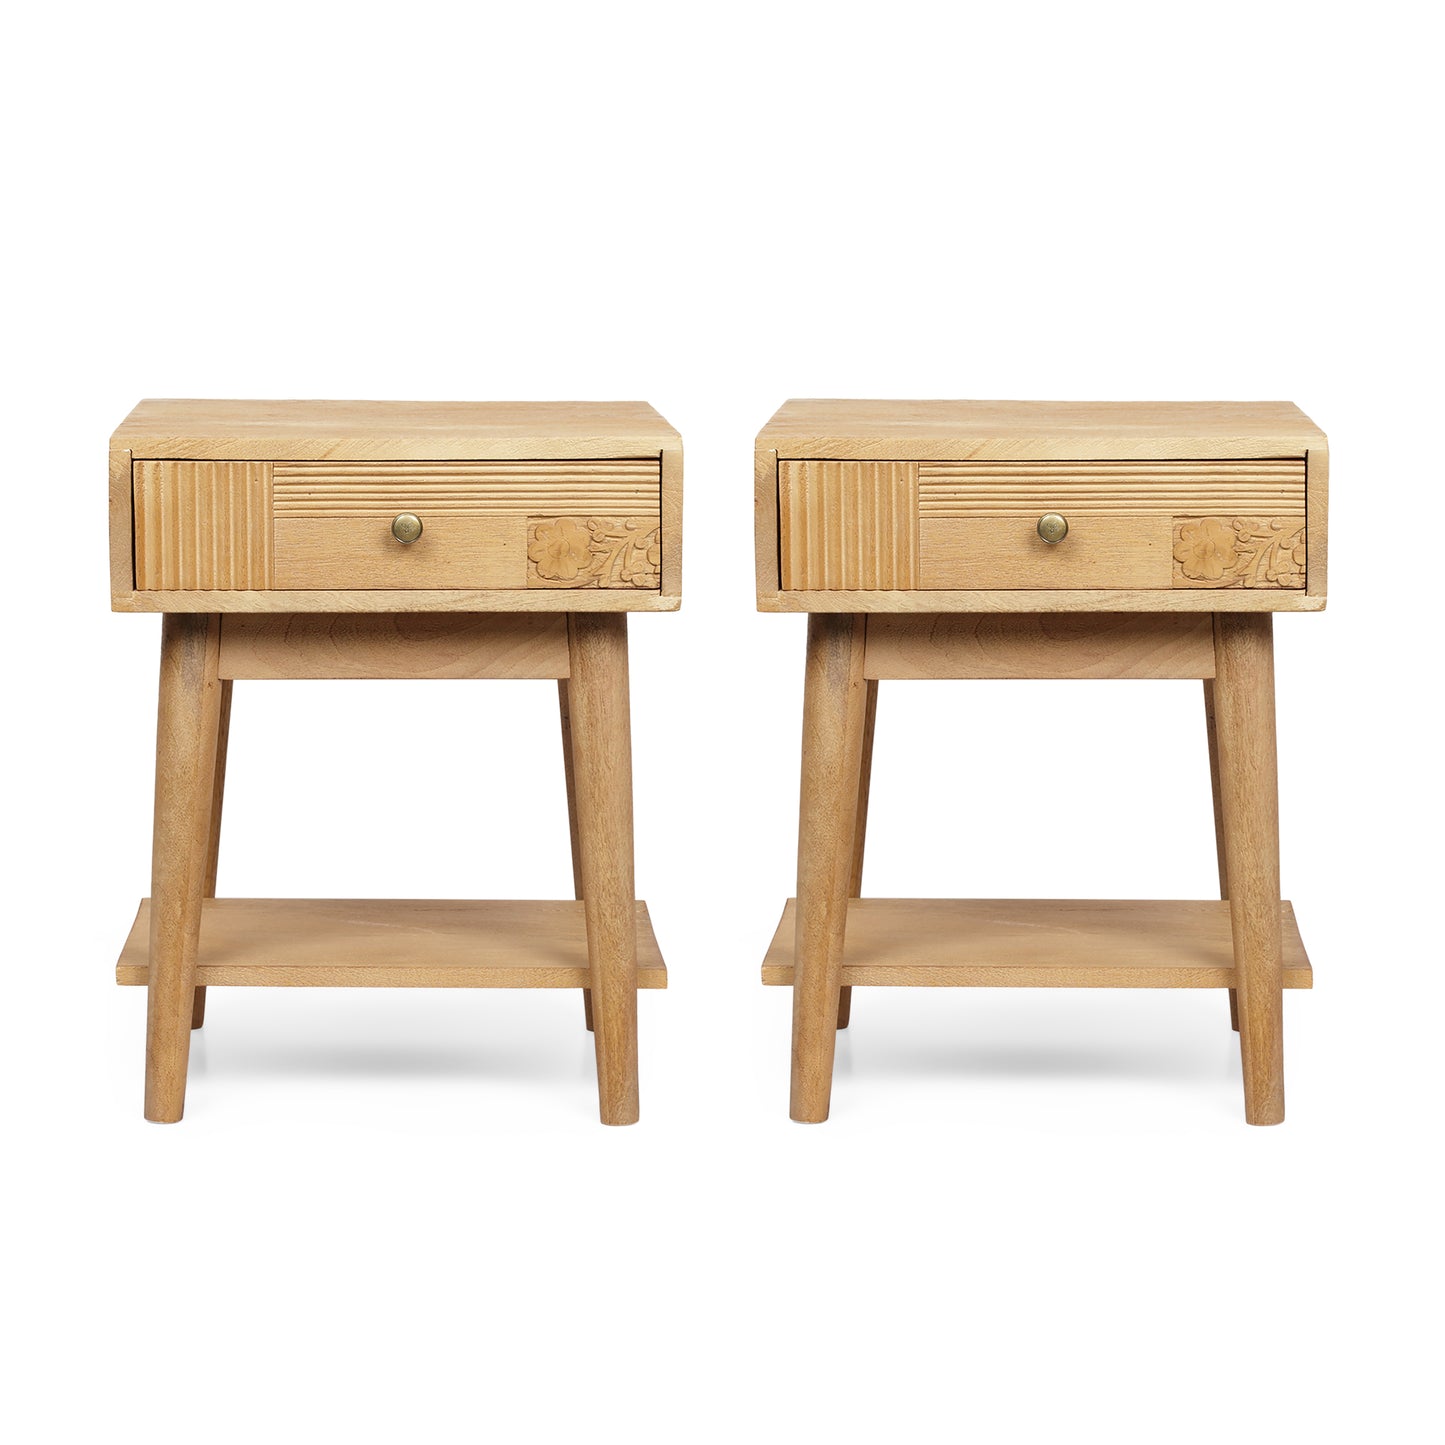 McManus Tennille Boho Handcrafted Mango Wood Nightstand with Drawer, Set of 2, Natural